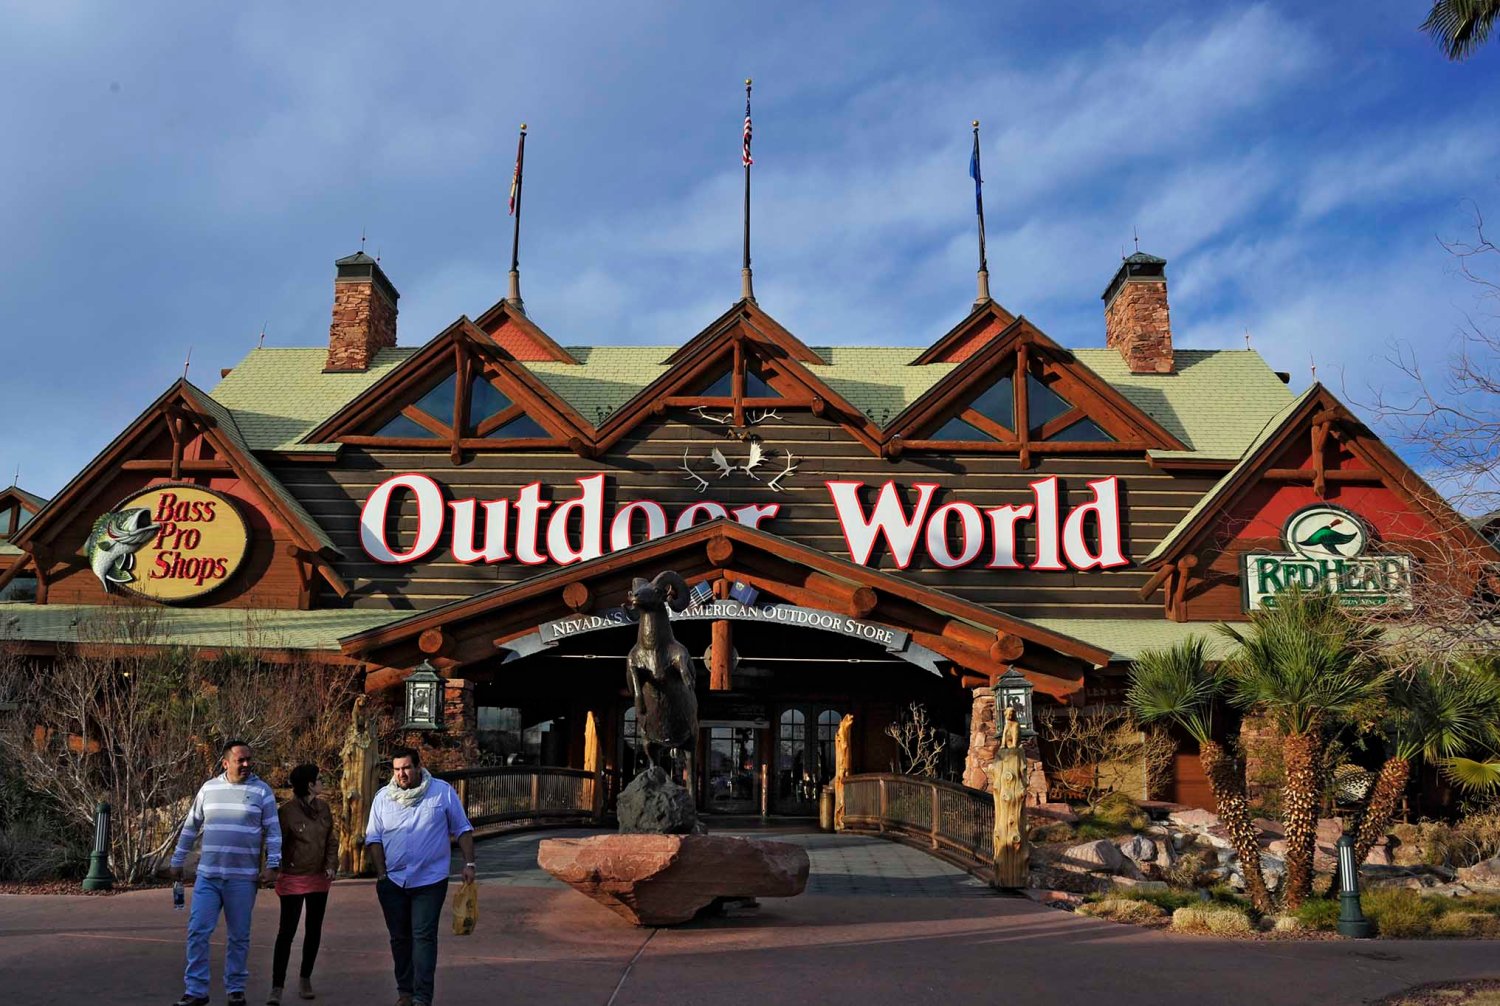 The Las Vegas "Bass Pro Shops Outdoor World” store all4shooters